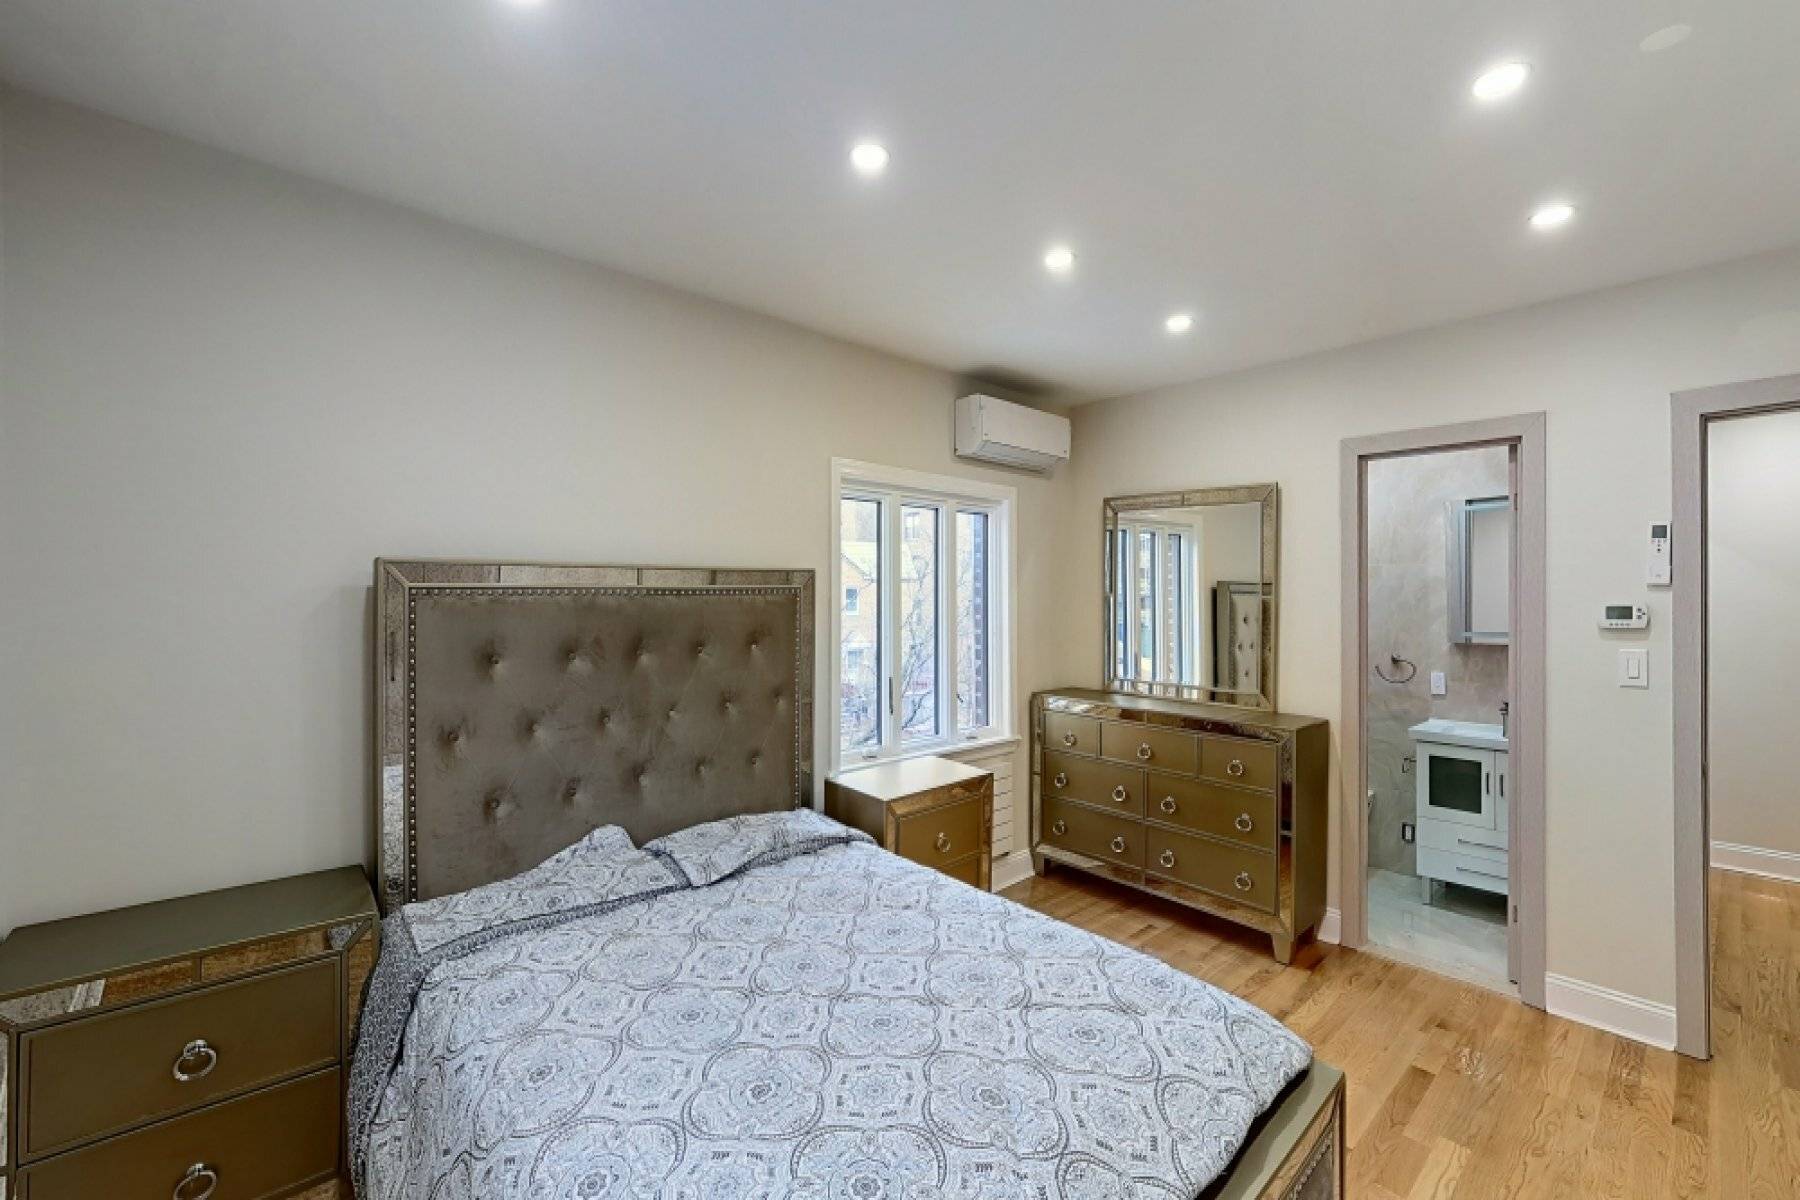 Beautifully renovated one family home with 4 large bedrooms, 3.